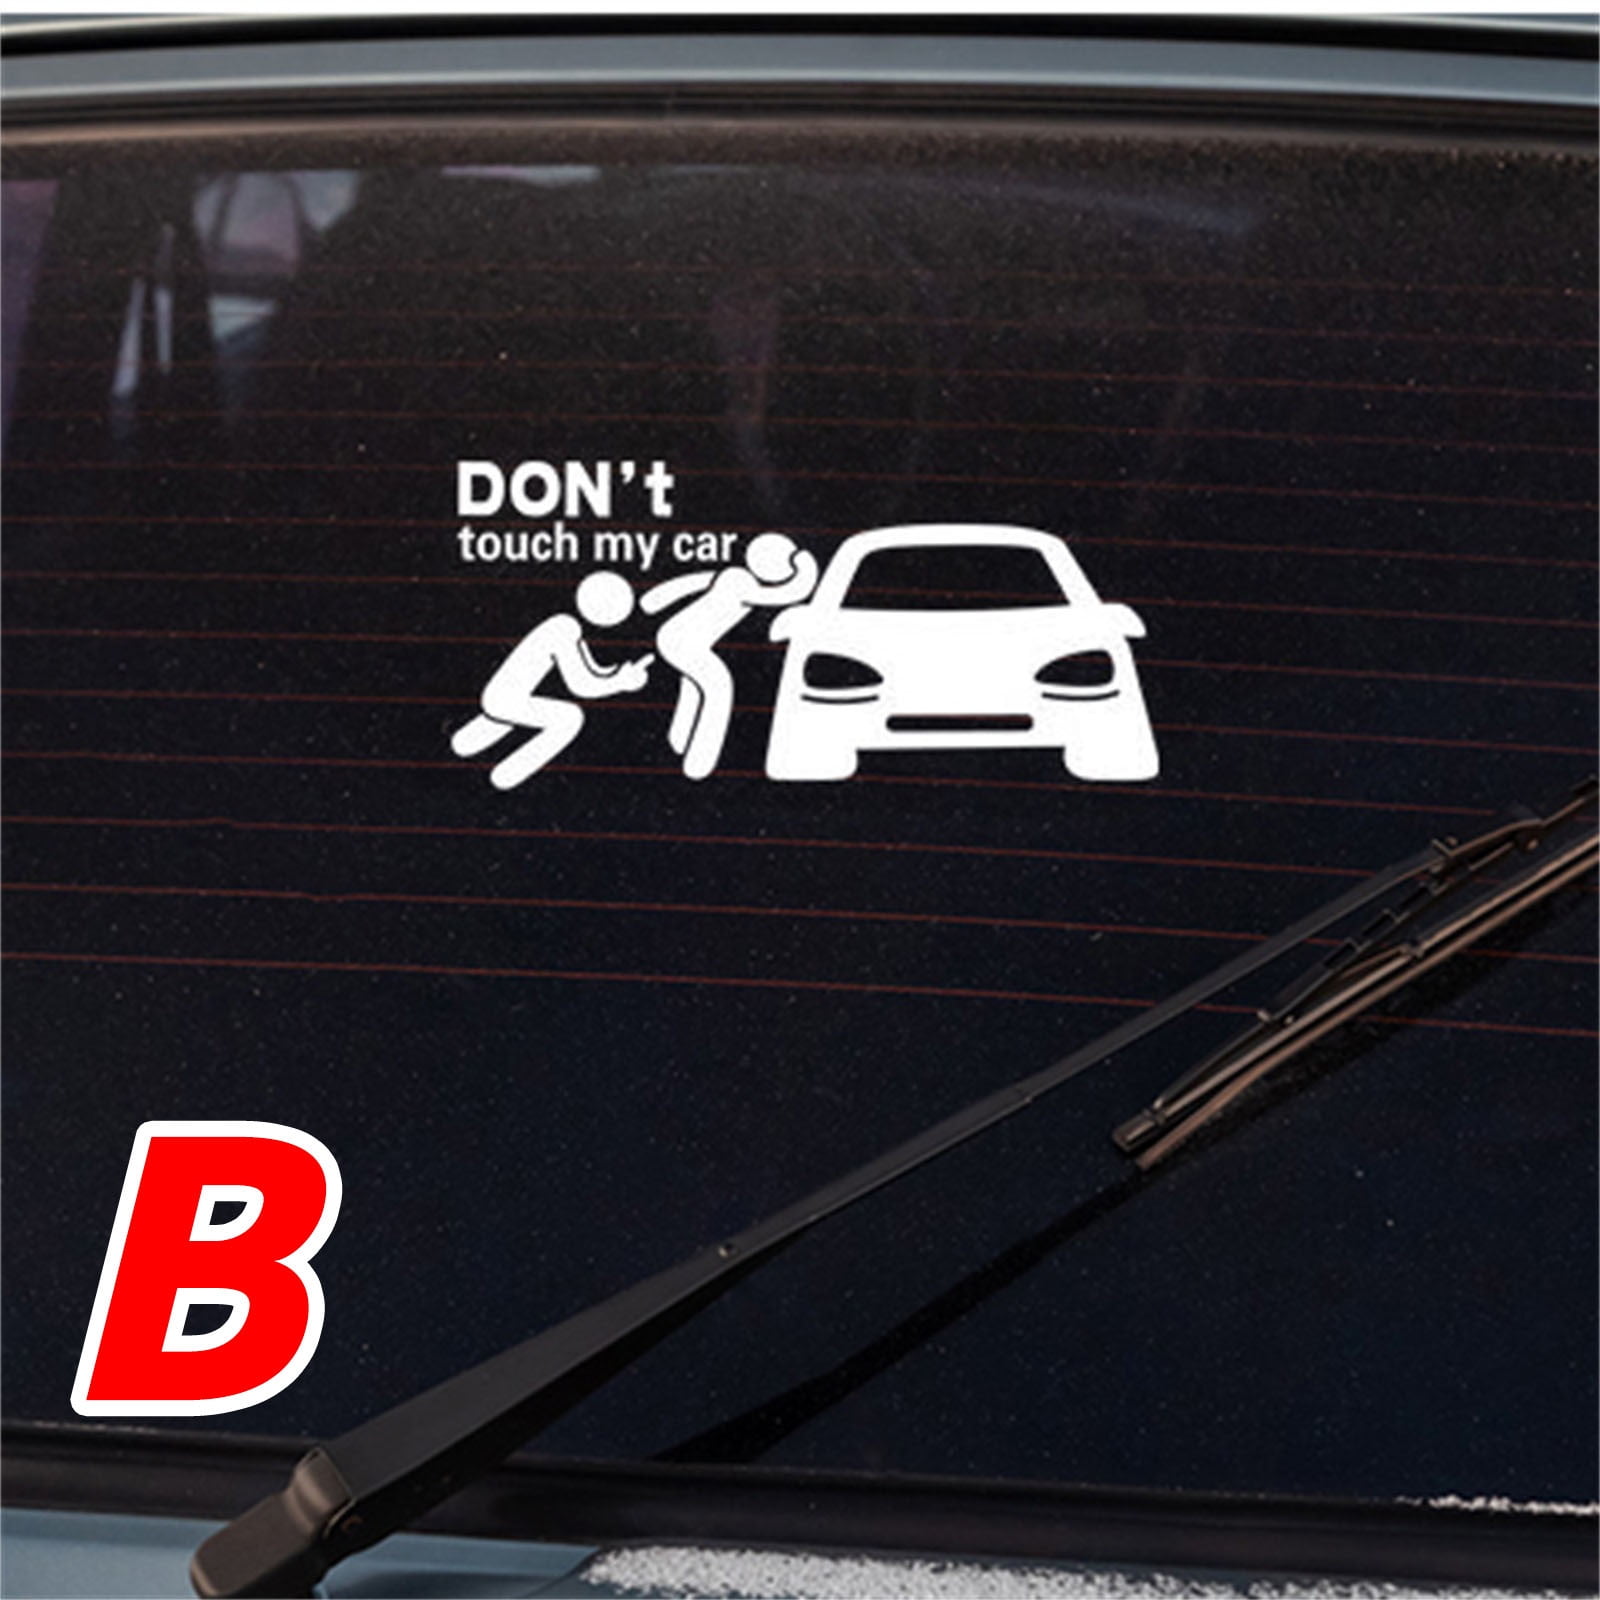 Don't Touch Anti-Theft 3M Reflective Car Luggage Skateboard Vinyl Decal Sticker 